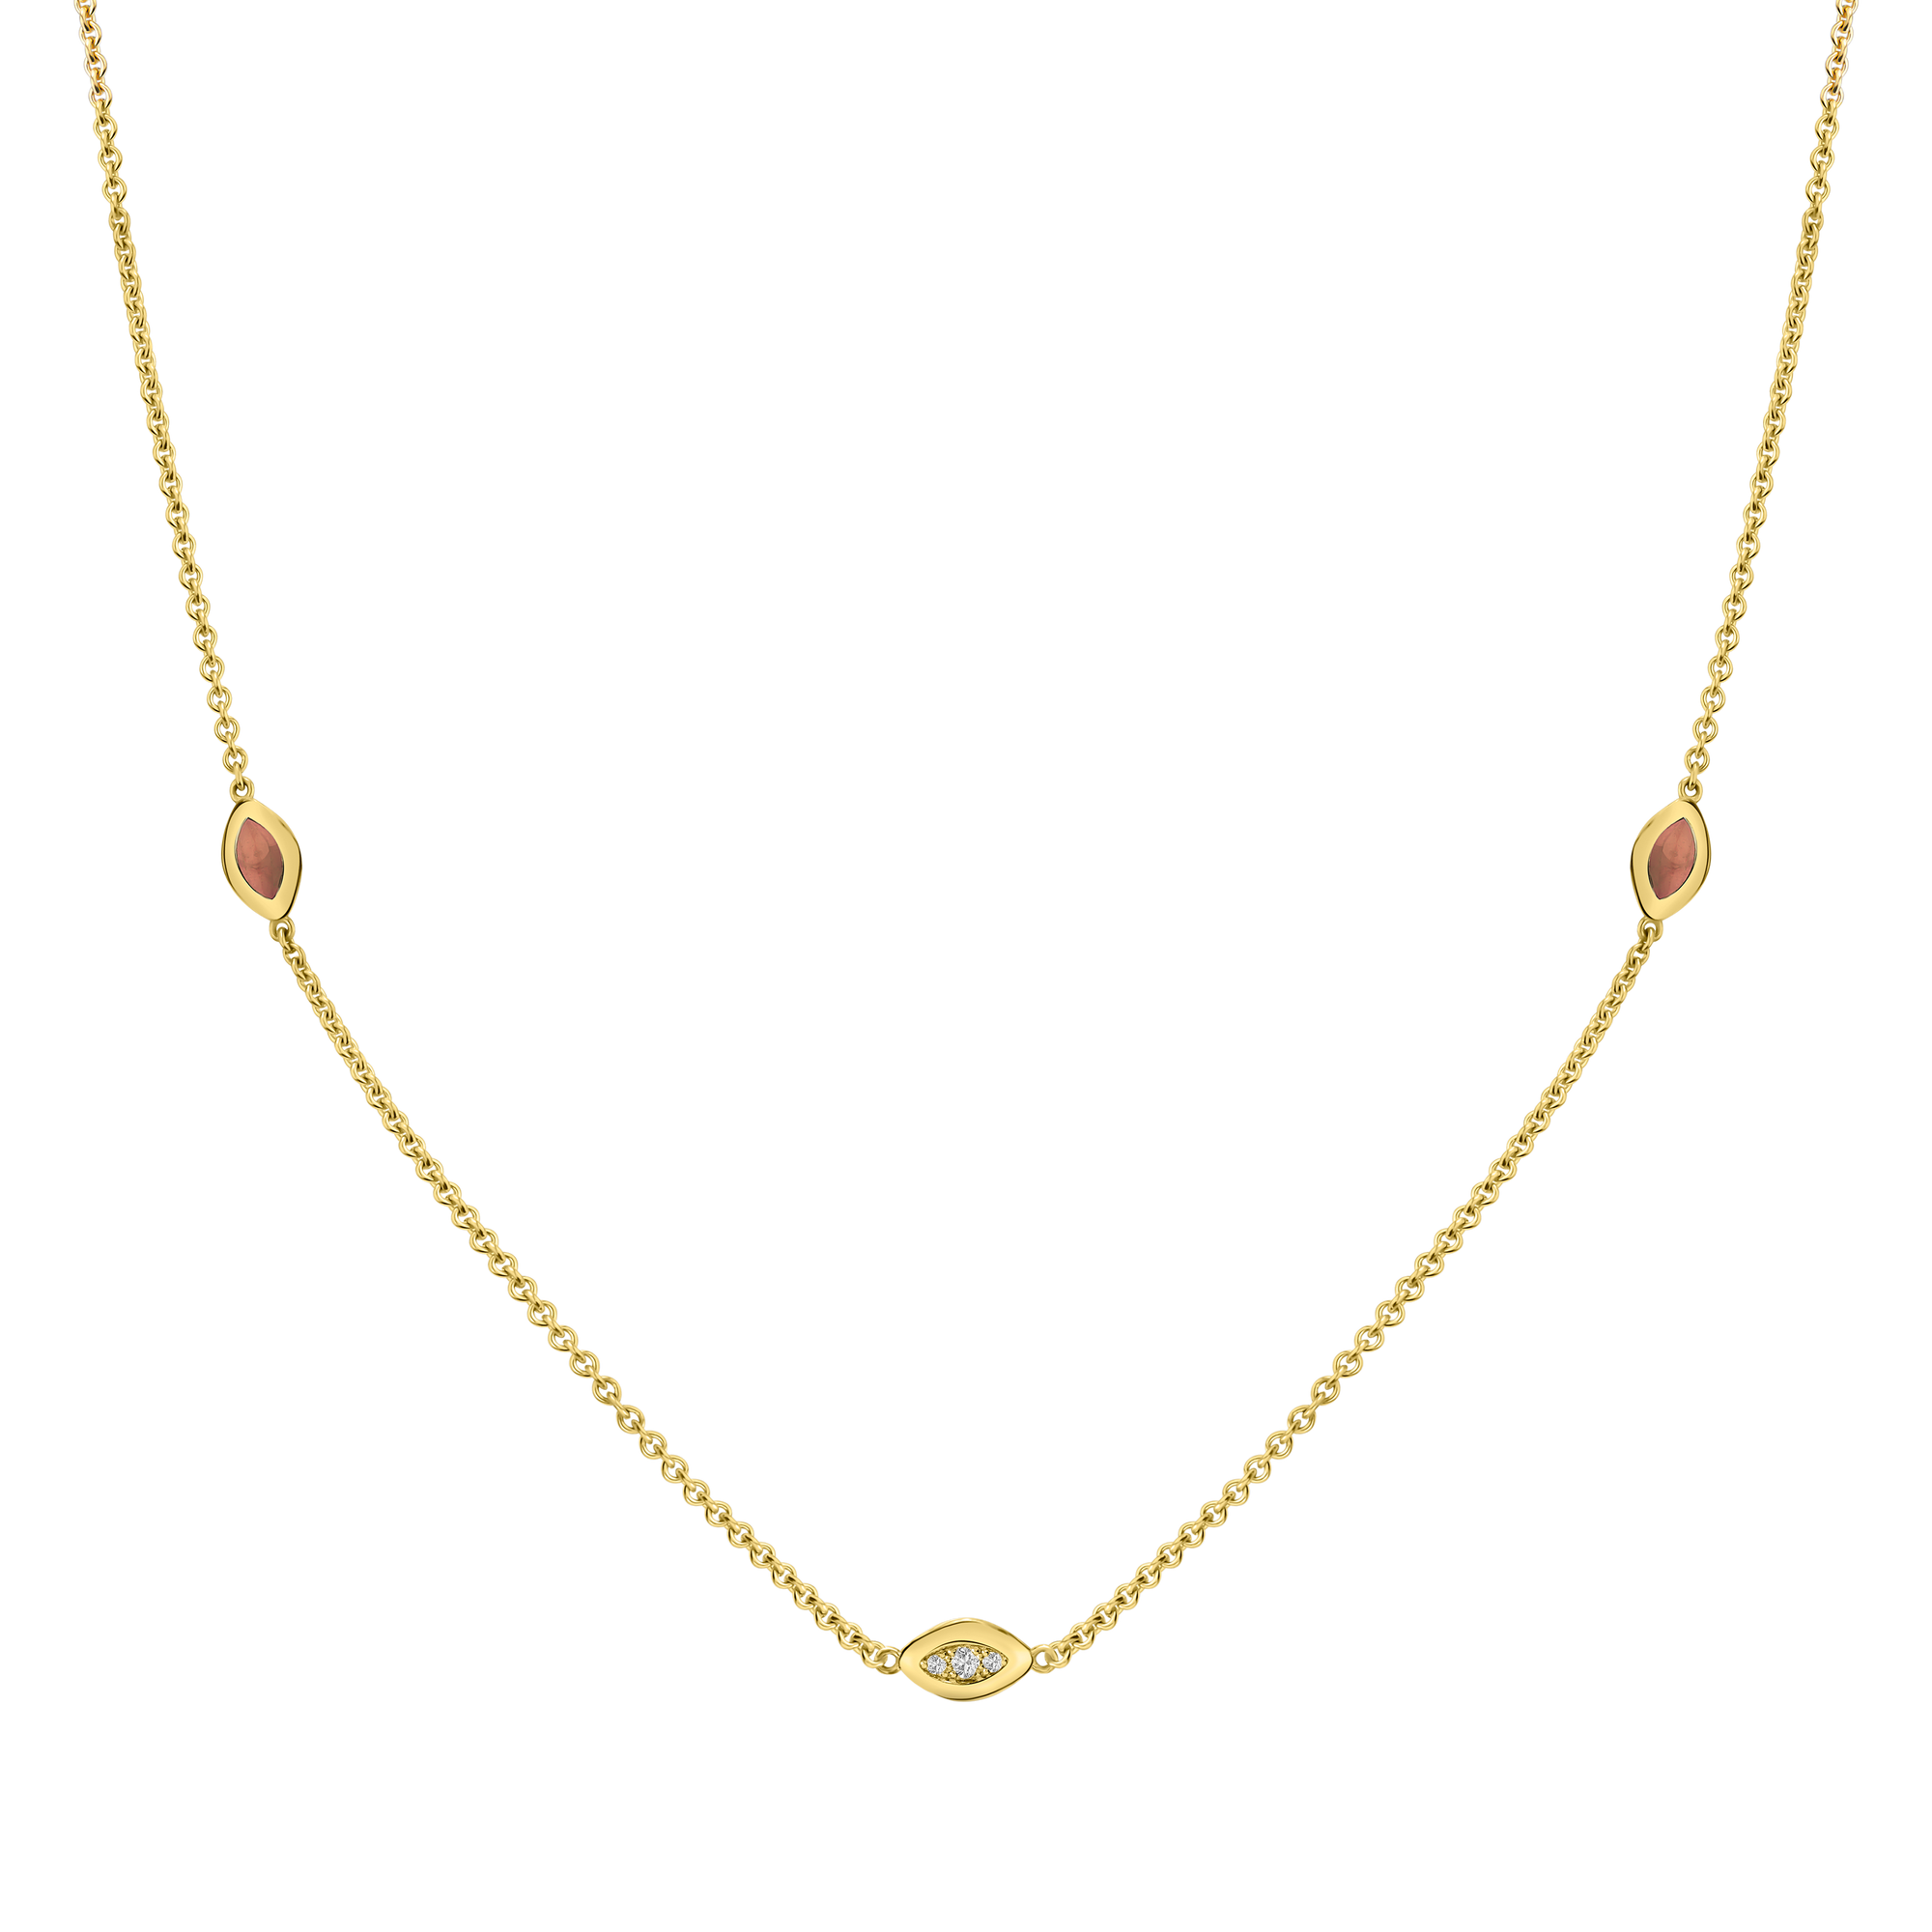 Three Link Italian Gold Necklace with Cognac Enamel and Diamond Pave